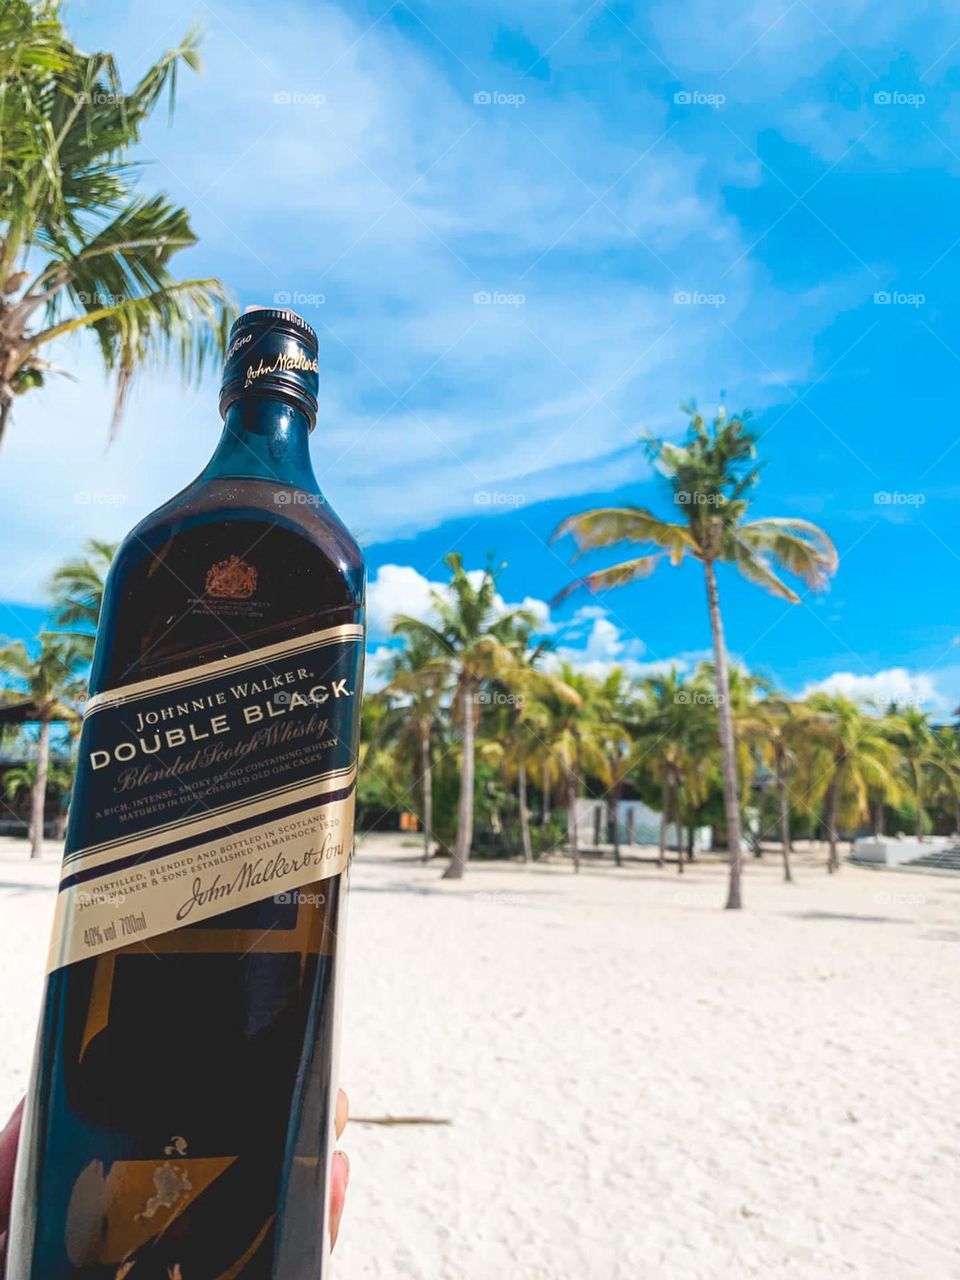 One of the best-selling alcoholic drink in Indonesia is Jonny Walker Blue Label. This photo further emphasizes not only the drink, but also the nice weather and beautiful beach in Indonesia, especially in Bali Island.